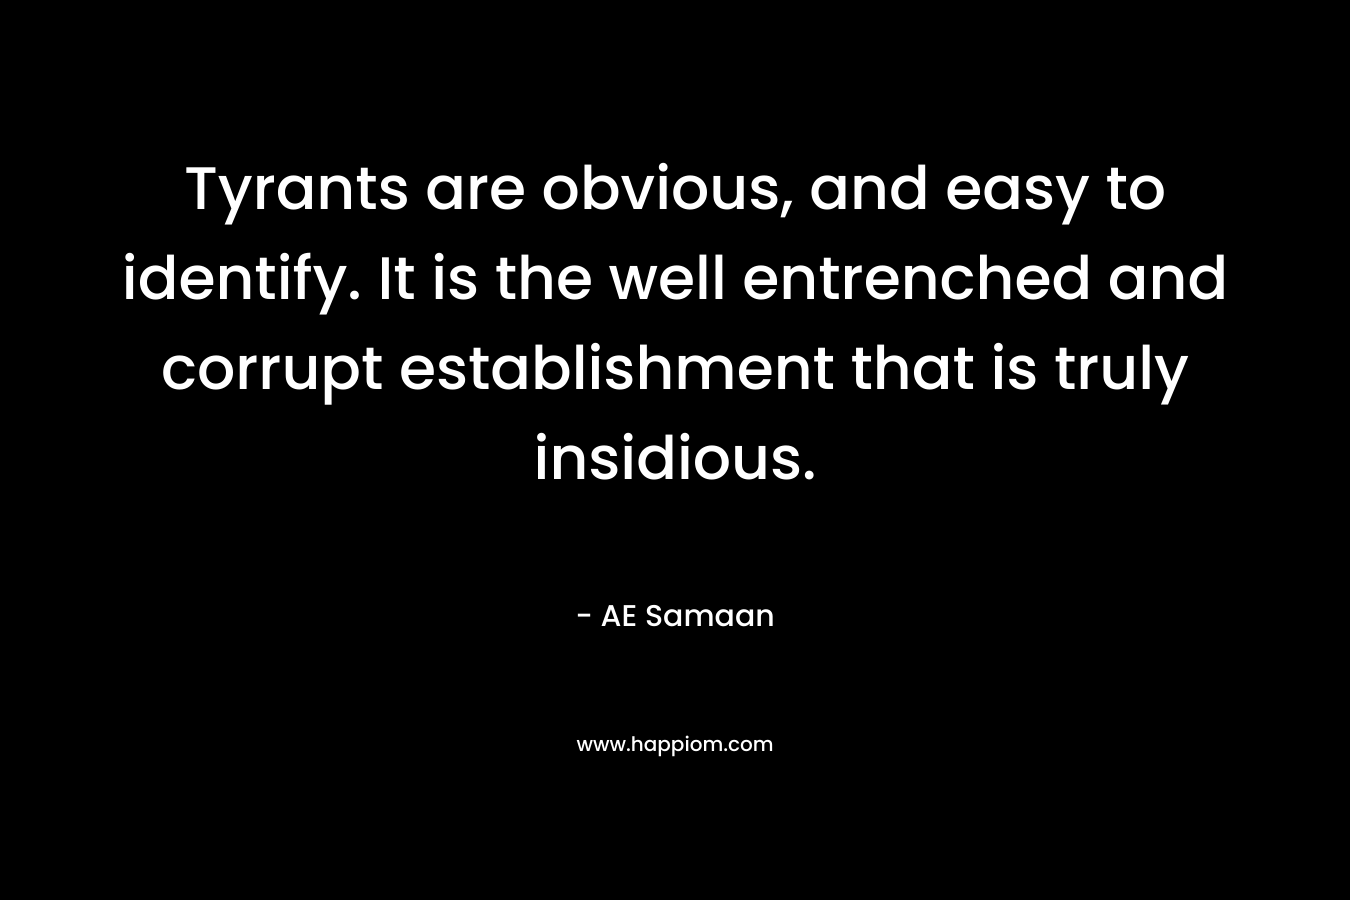 Tyrants are obvious, and easy to identify. It is the well entrenched and corrupt establishment that is truly insidious. – AE Samaan